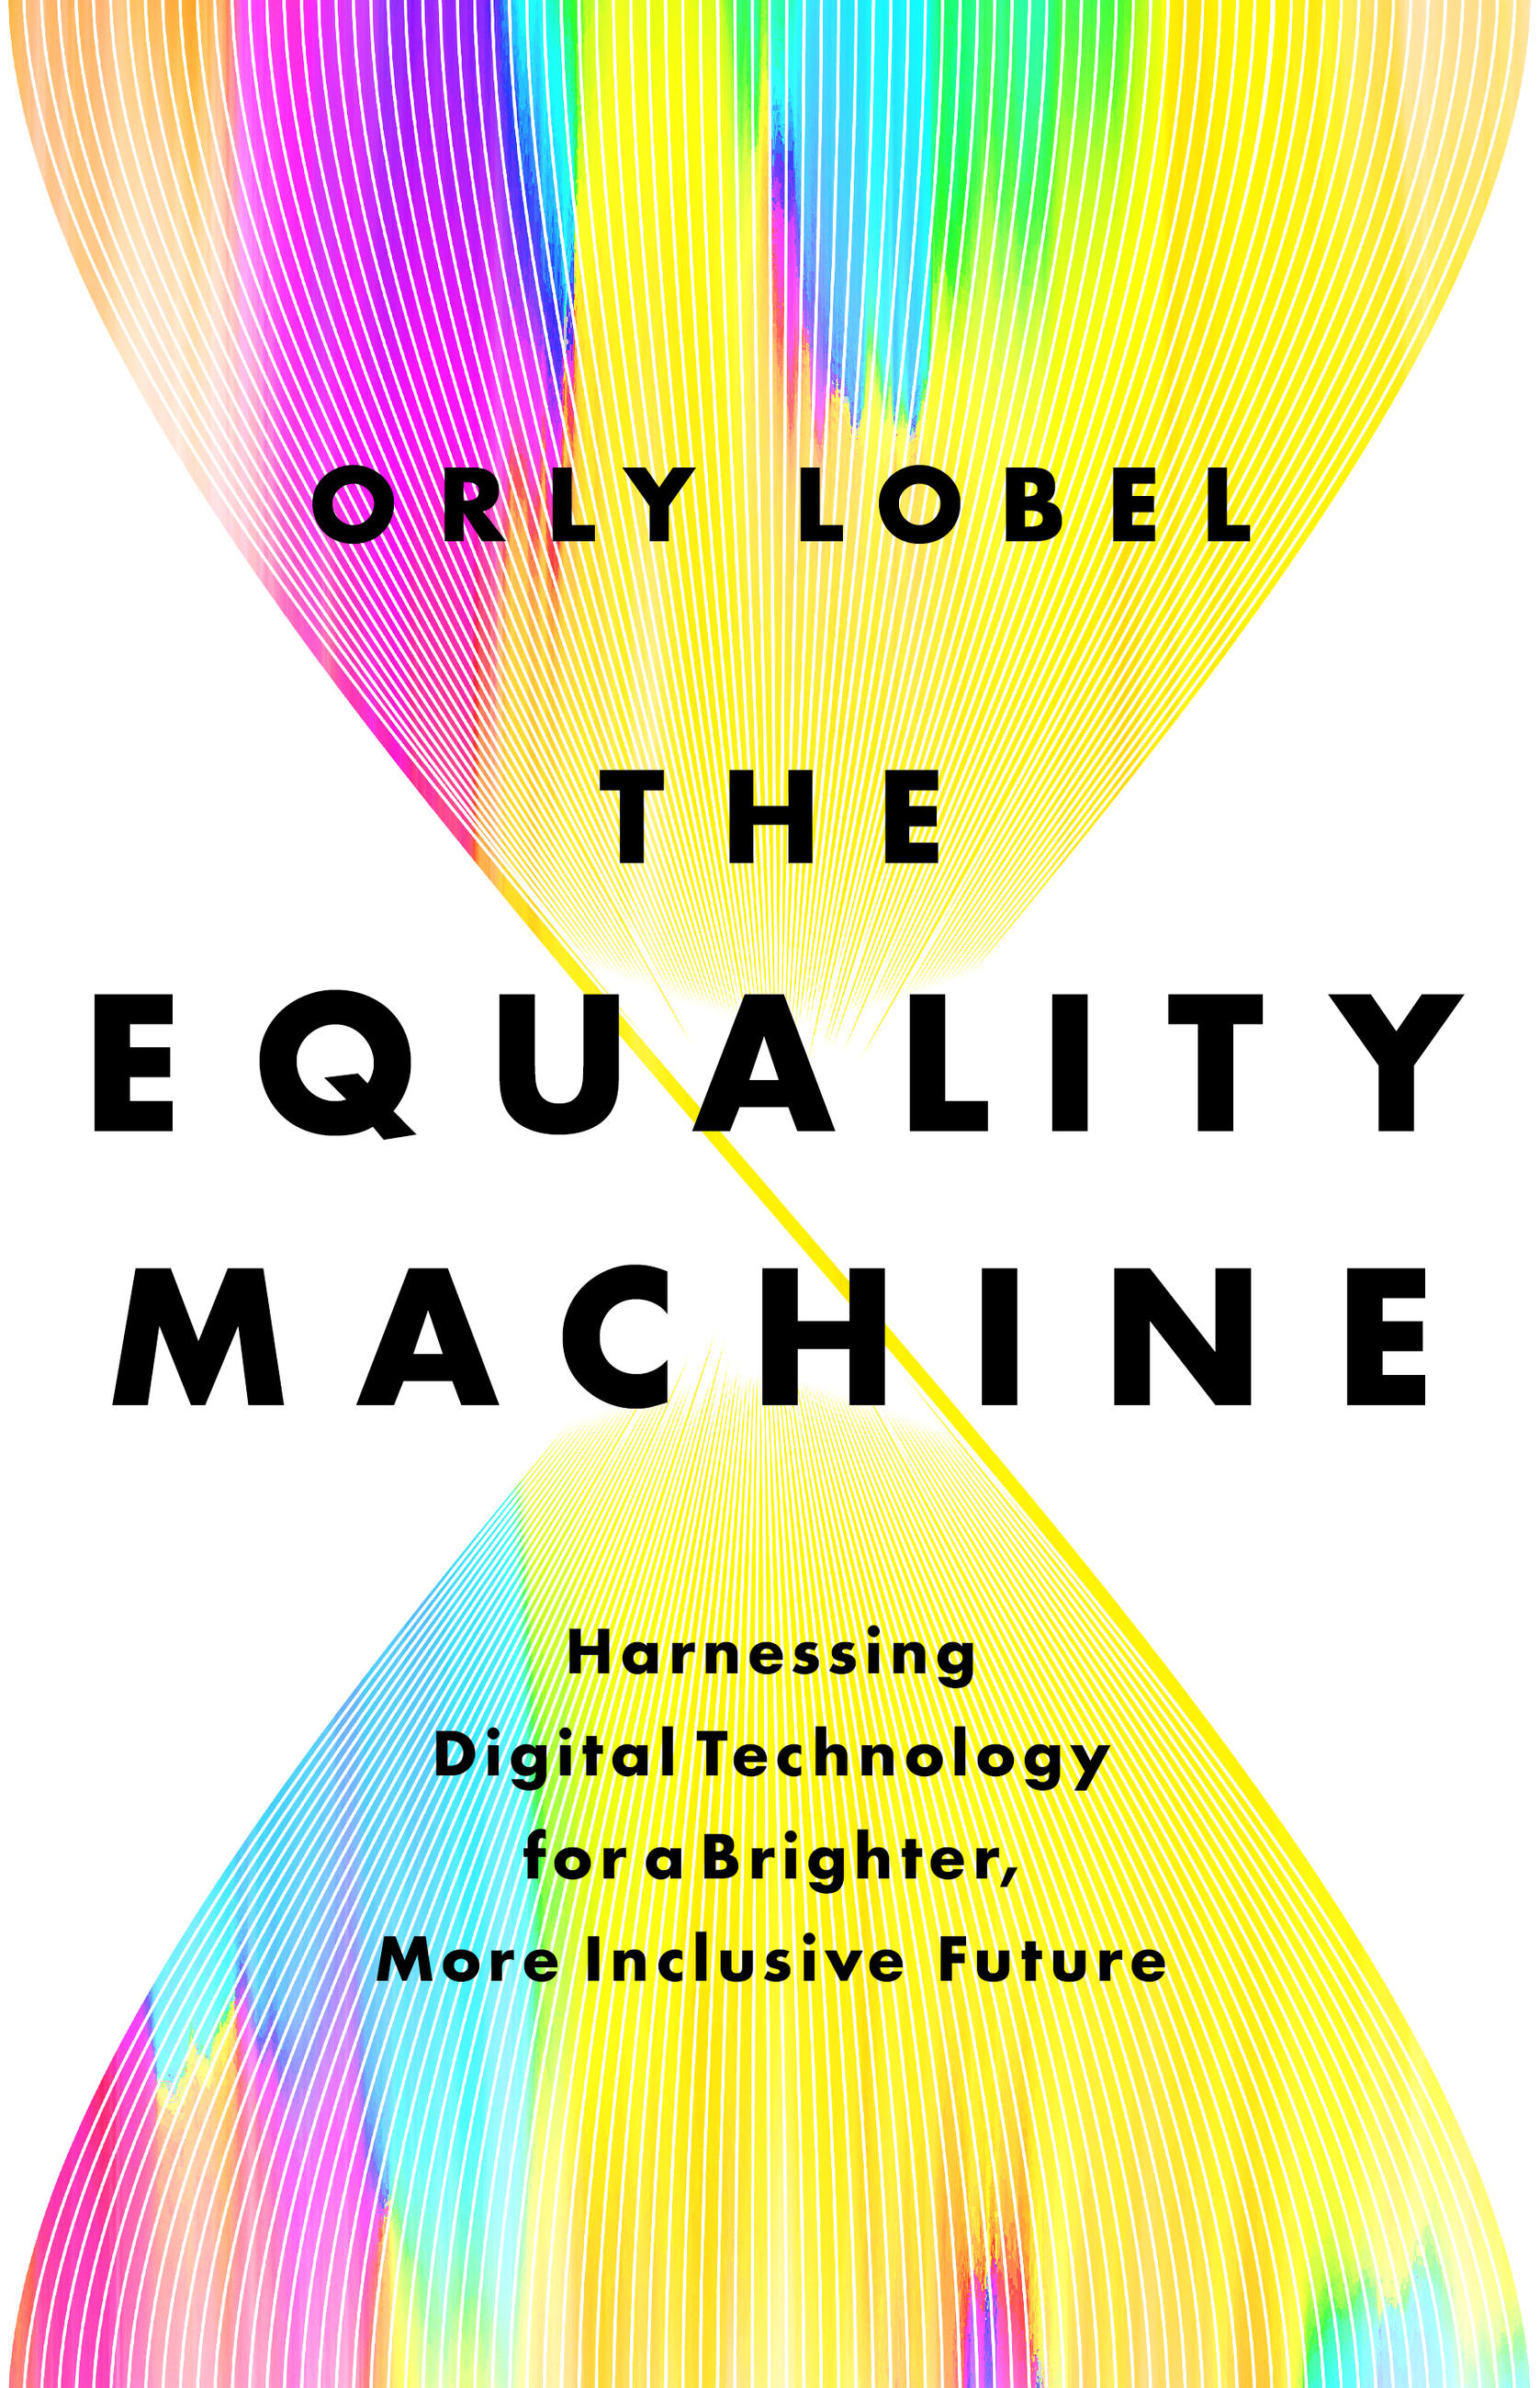 Equality　Book　Hachette　Lobel　Machine　Orly　by　The　Group